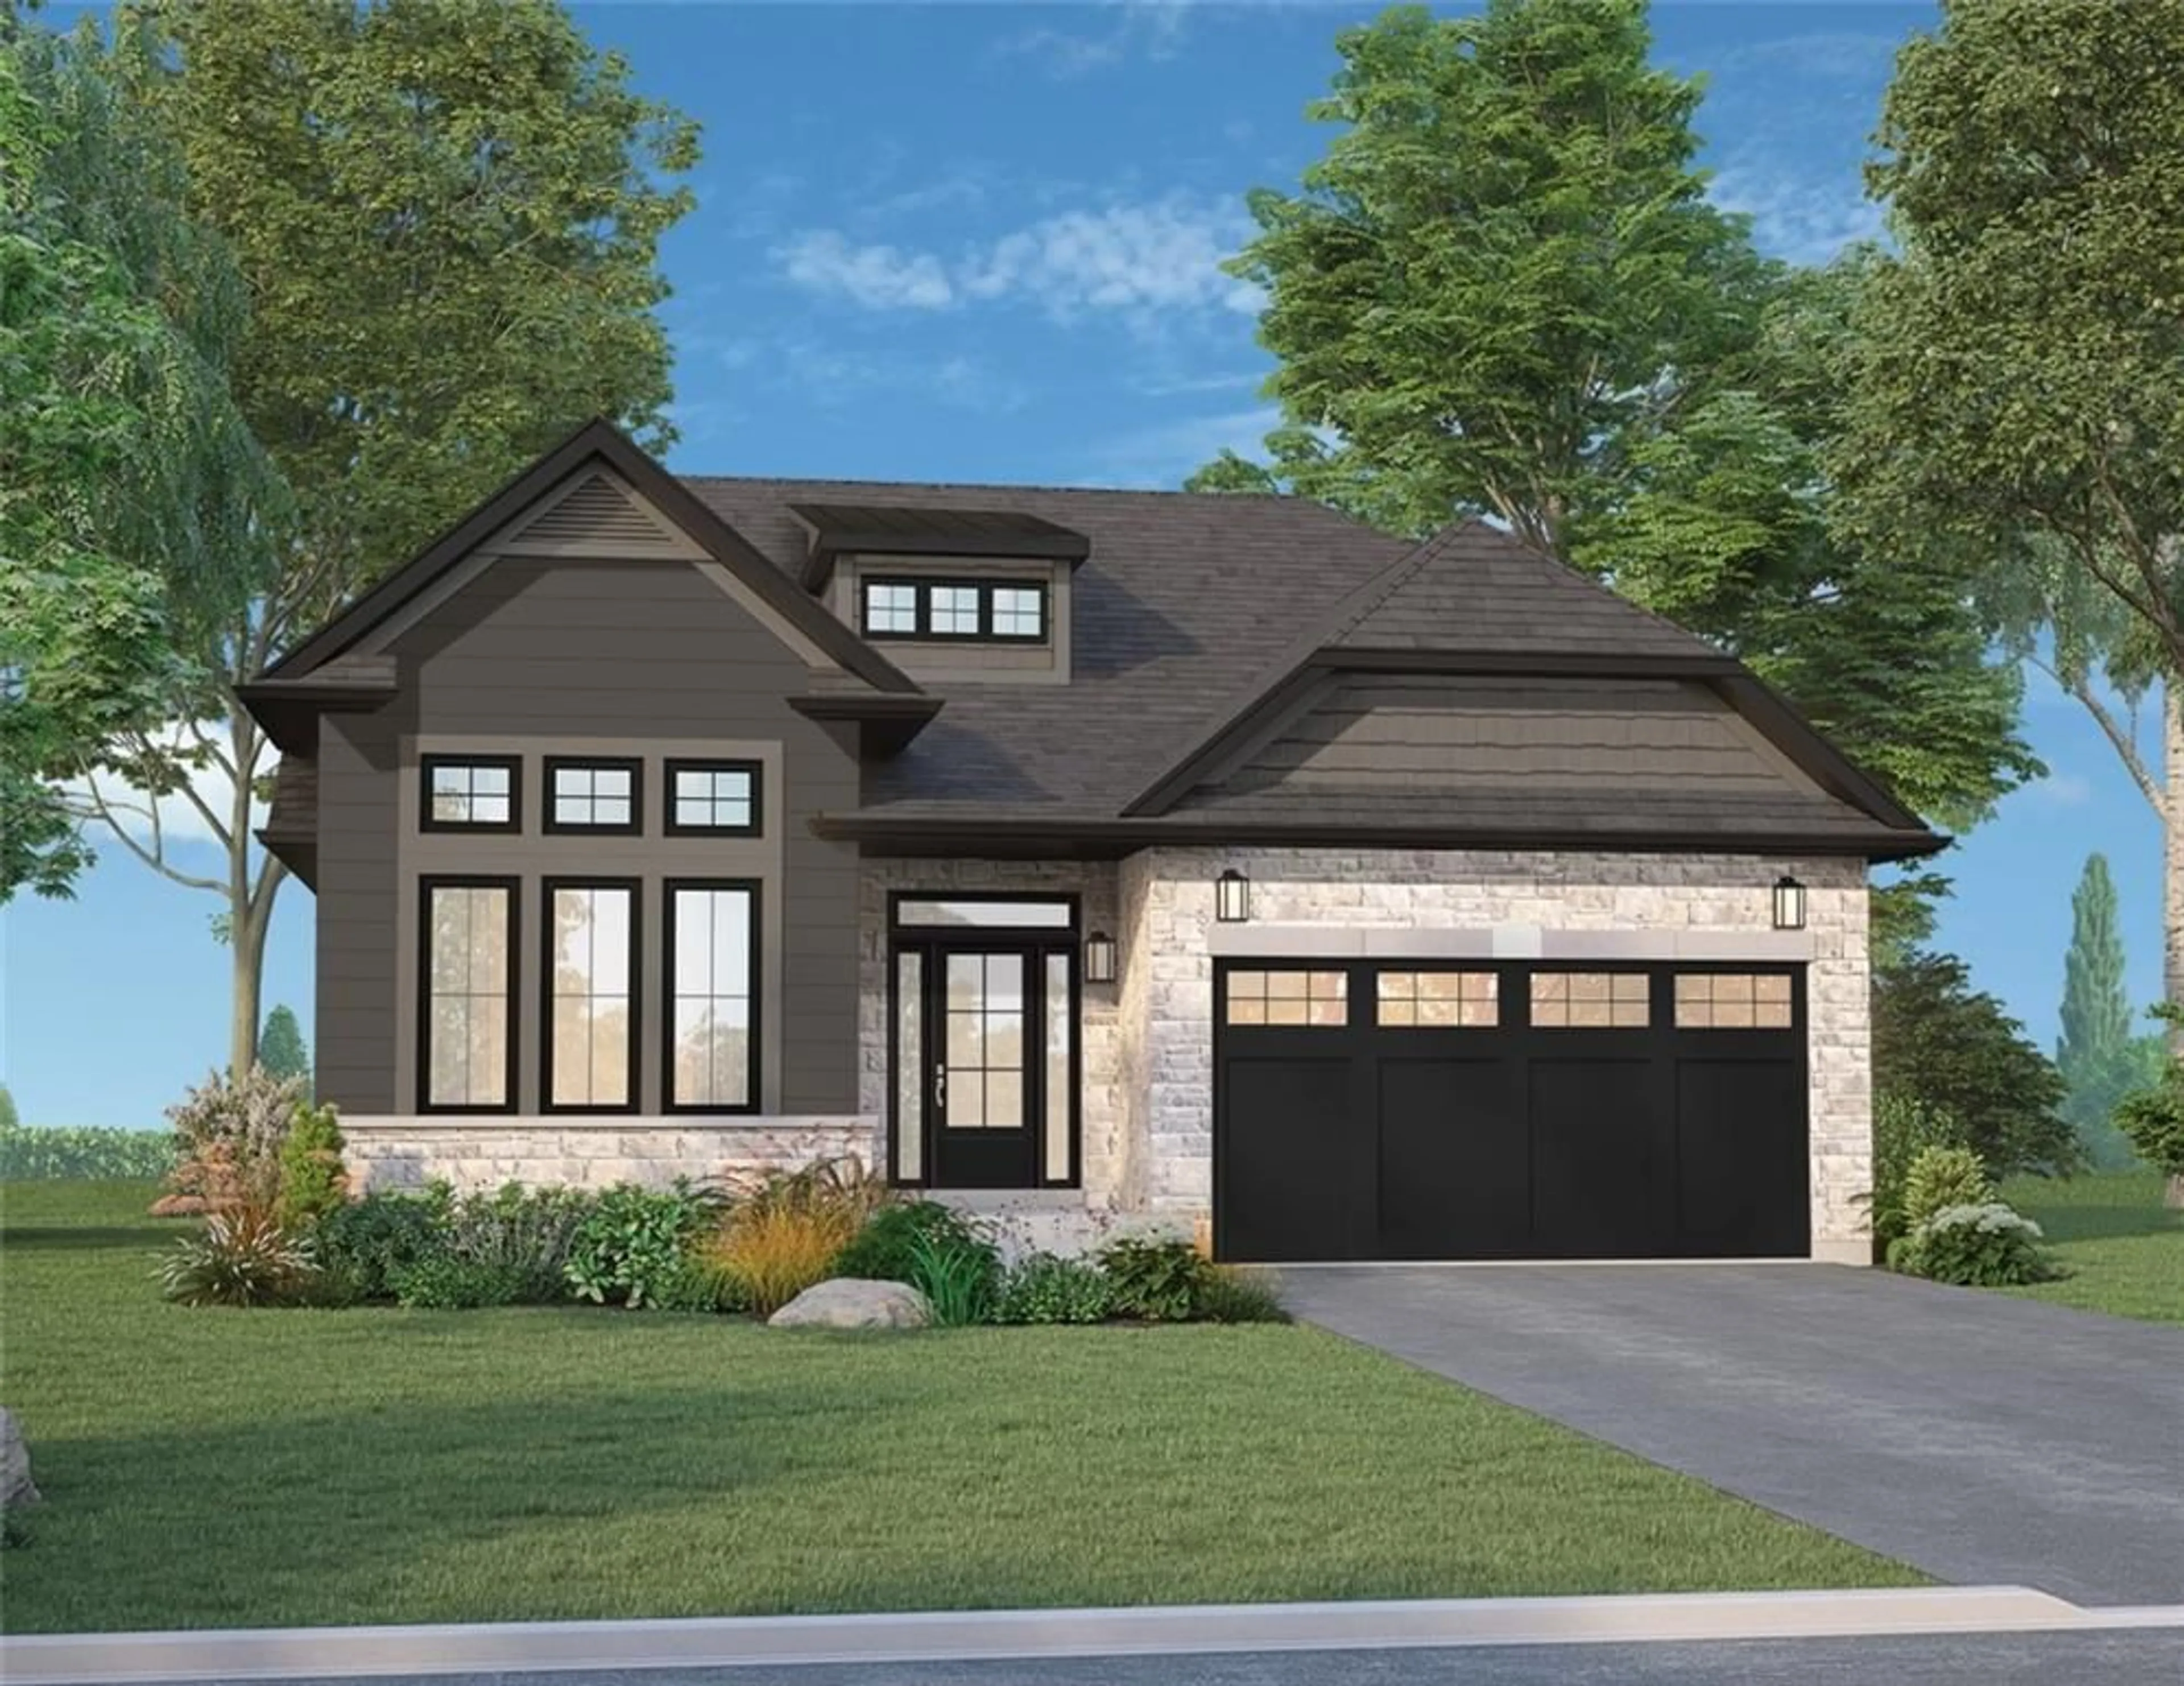 Home with brick exterior material for 100 Watershore Dr, Stoney Creek Ontario L8E 0C1